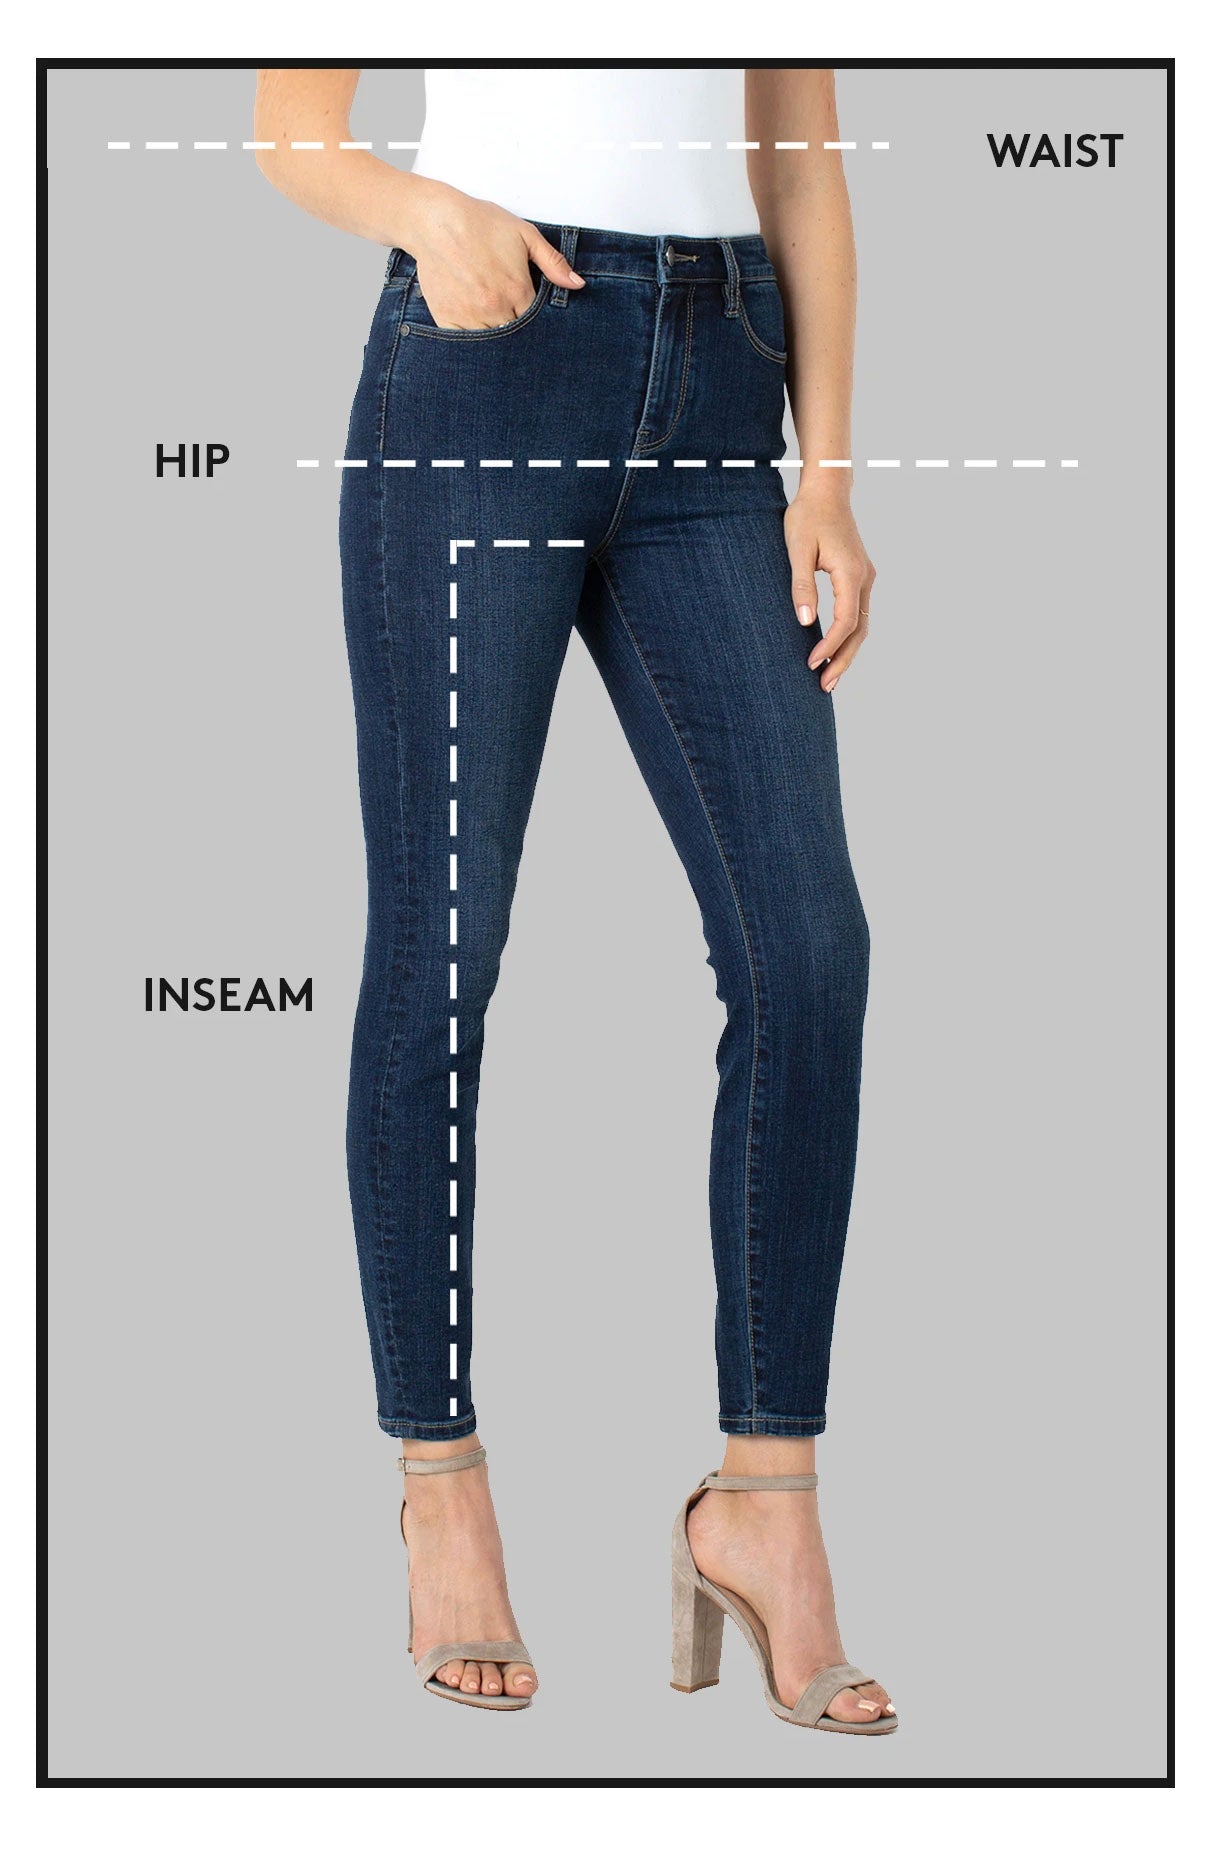 Buy > jeans measurement chart > in stock